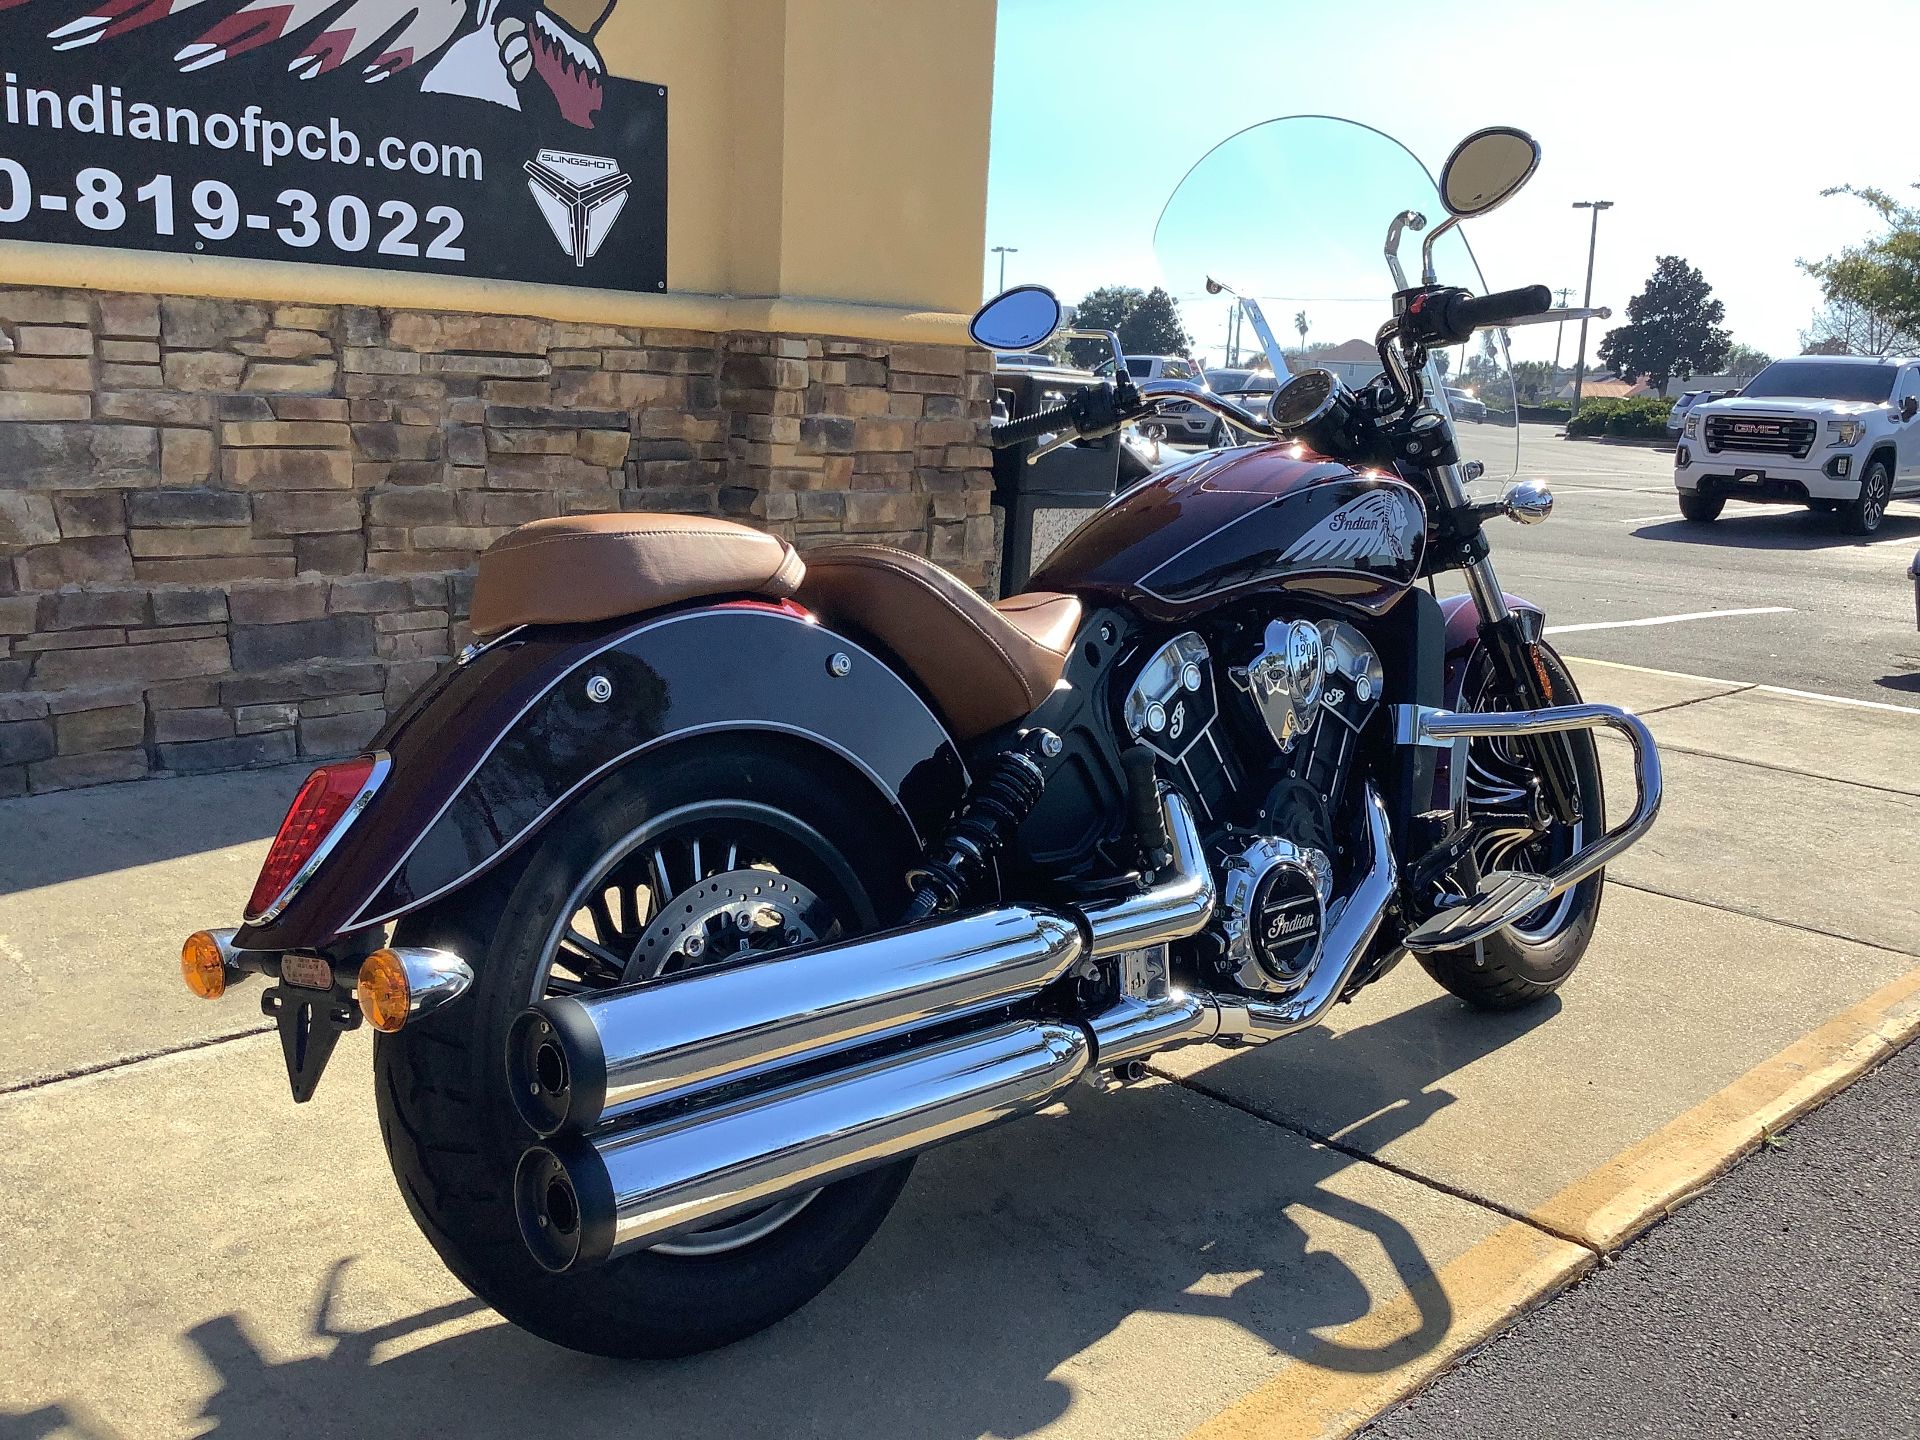 2021 Indian Motorcycle SCOUT ABS TWO TONE in Panama City Beach, Florida - Photo 3